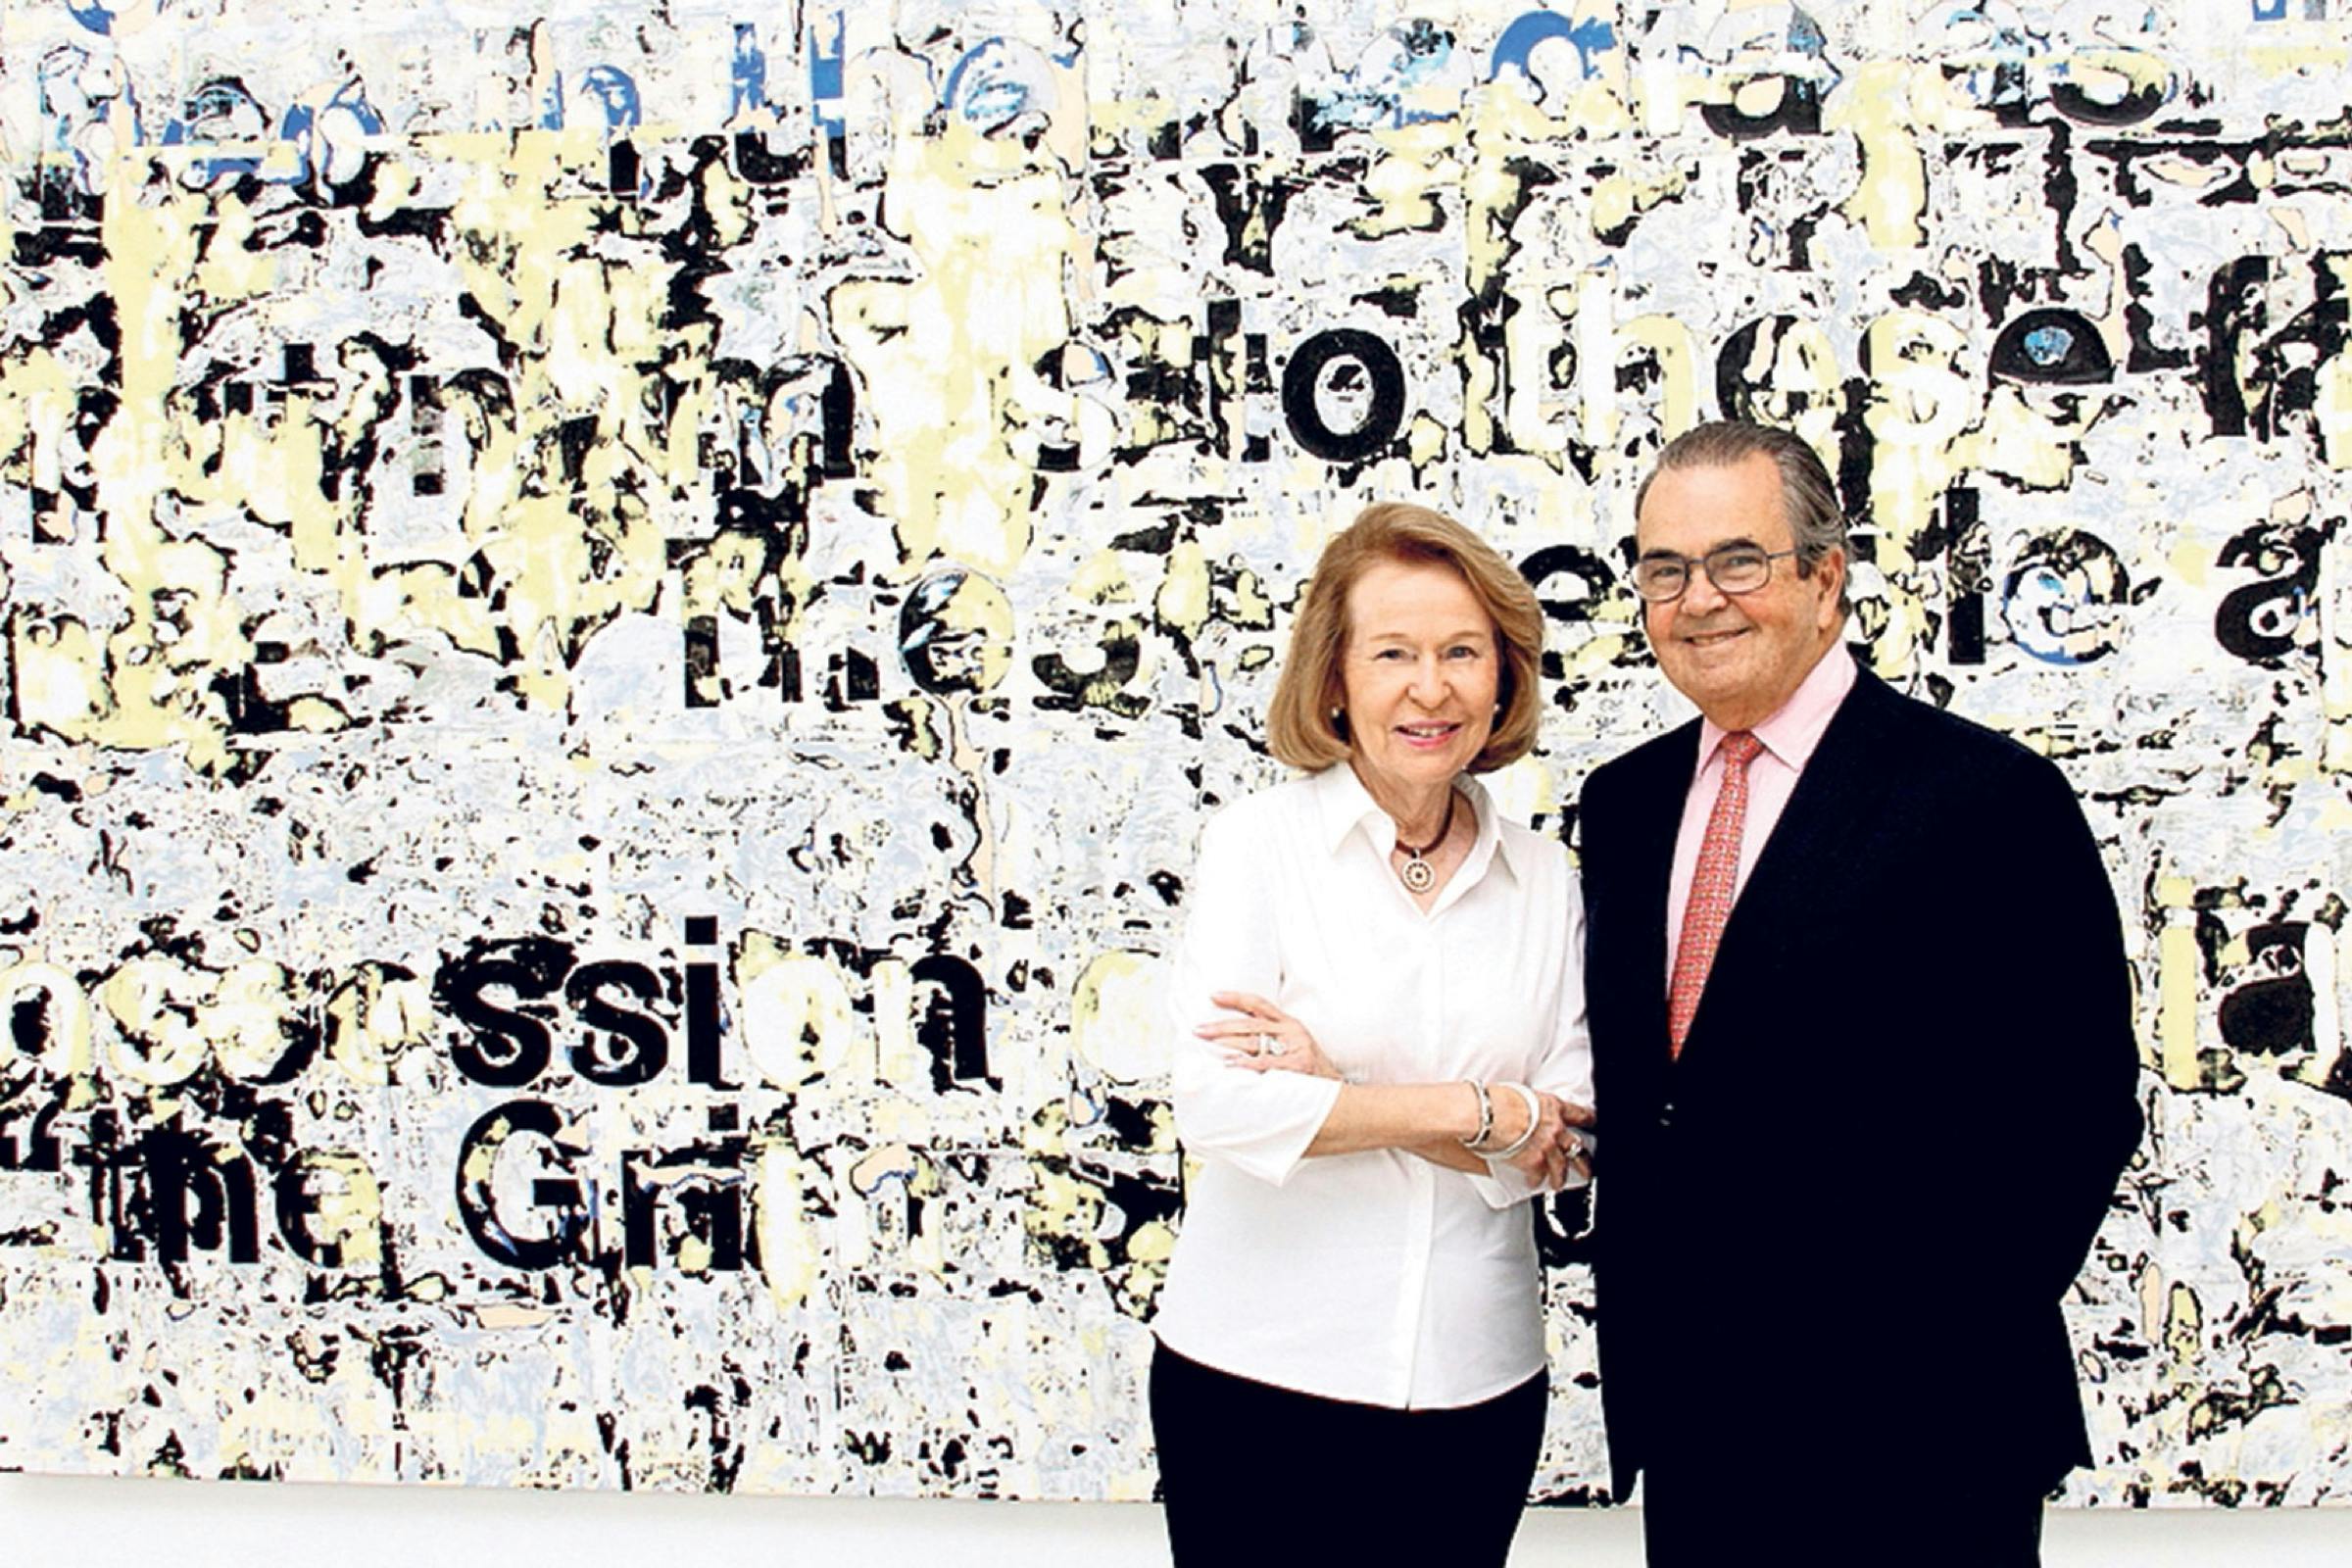 A photo of Rosa and Carlos de la Cruz in front of a painting by Mark Bradford.